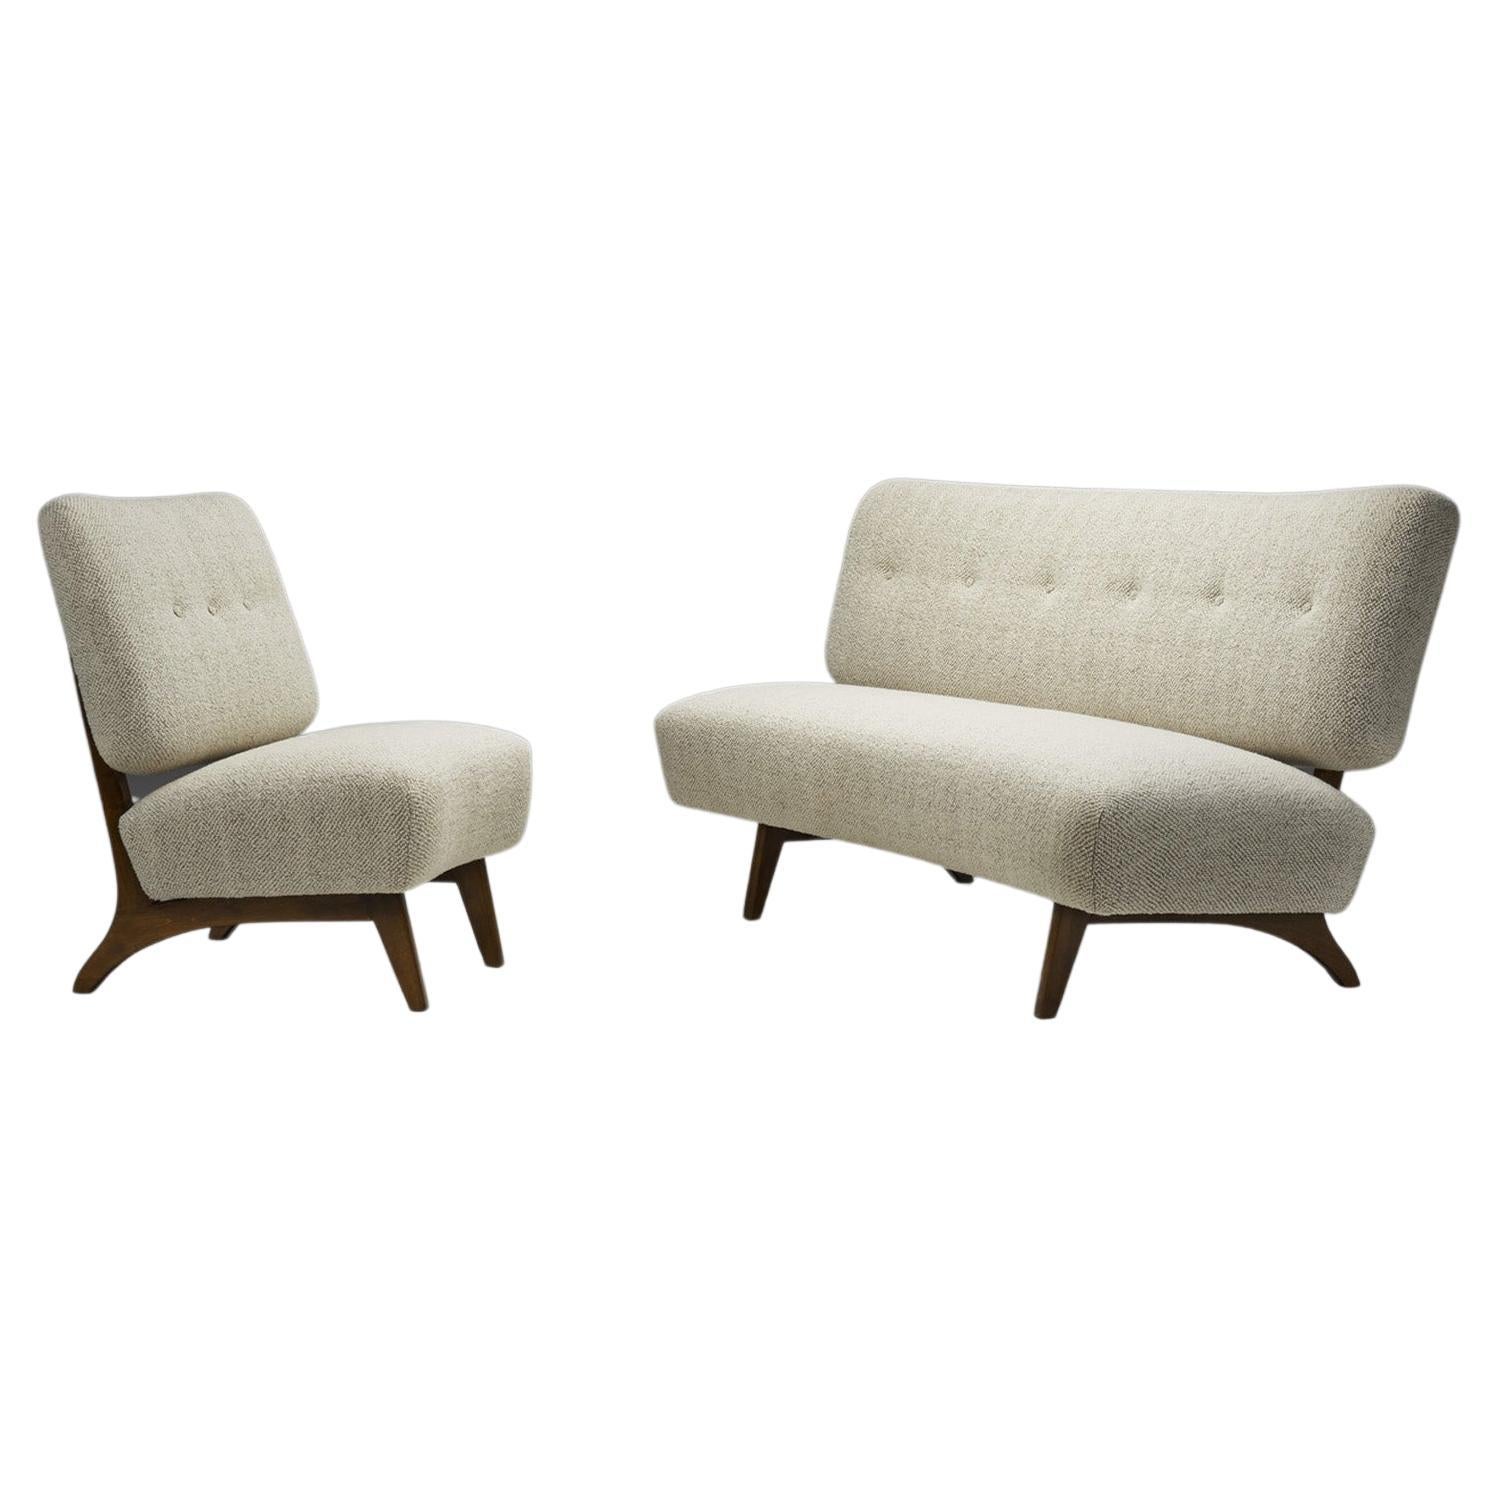 Aake Anttila "Susanna" Sofa and Lounge Chair for Lepokalusto, Finland 1950s For Sale